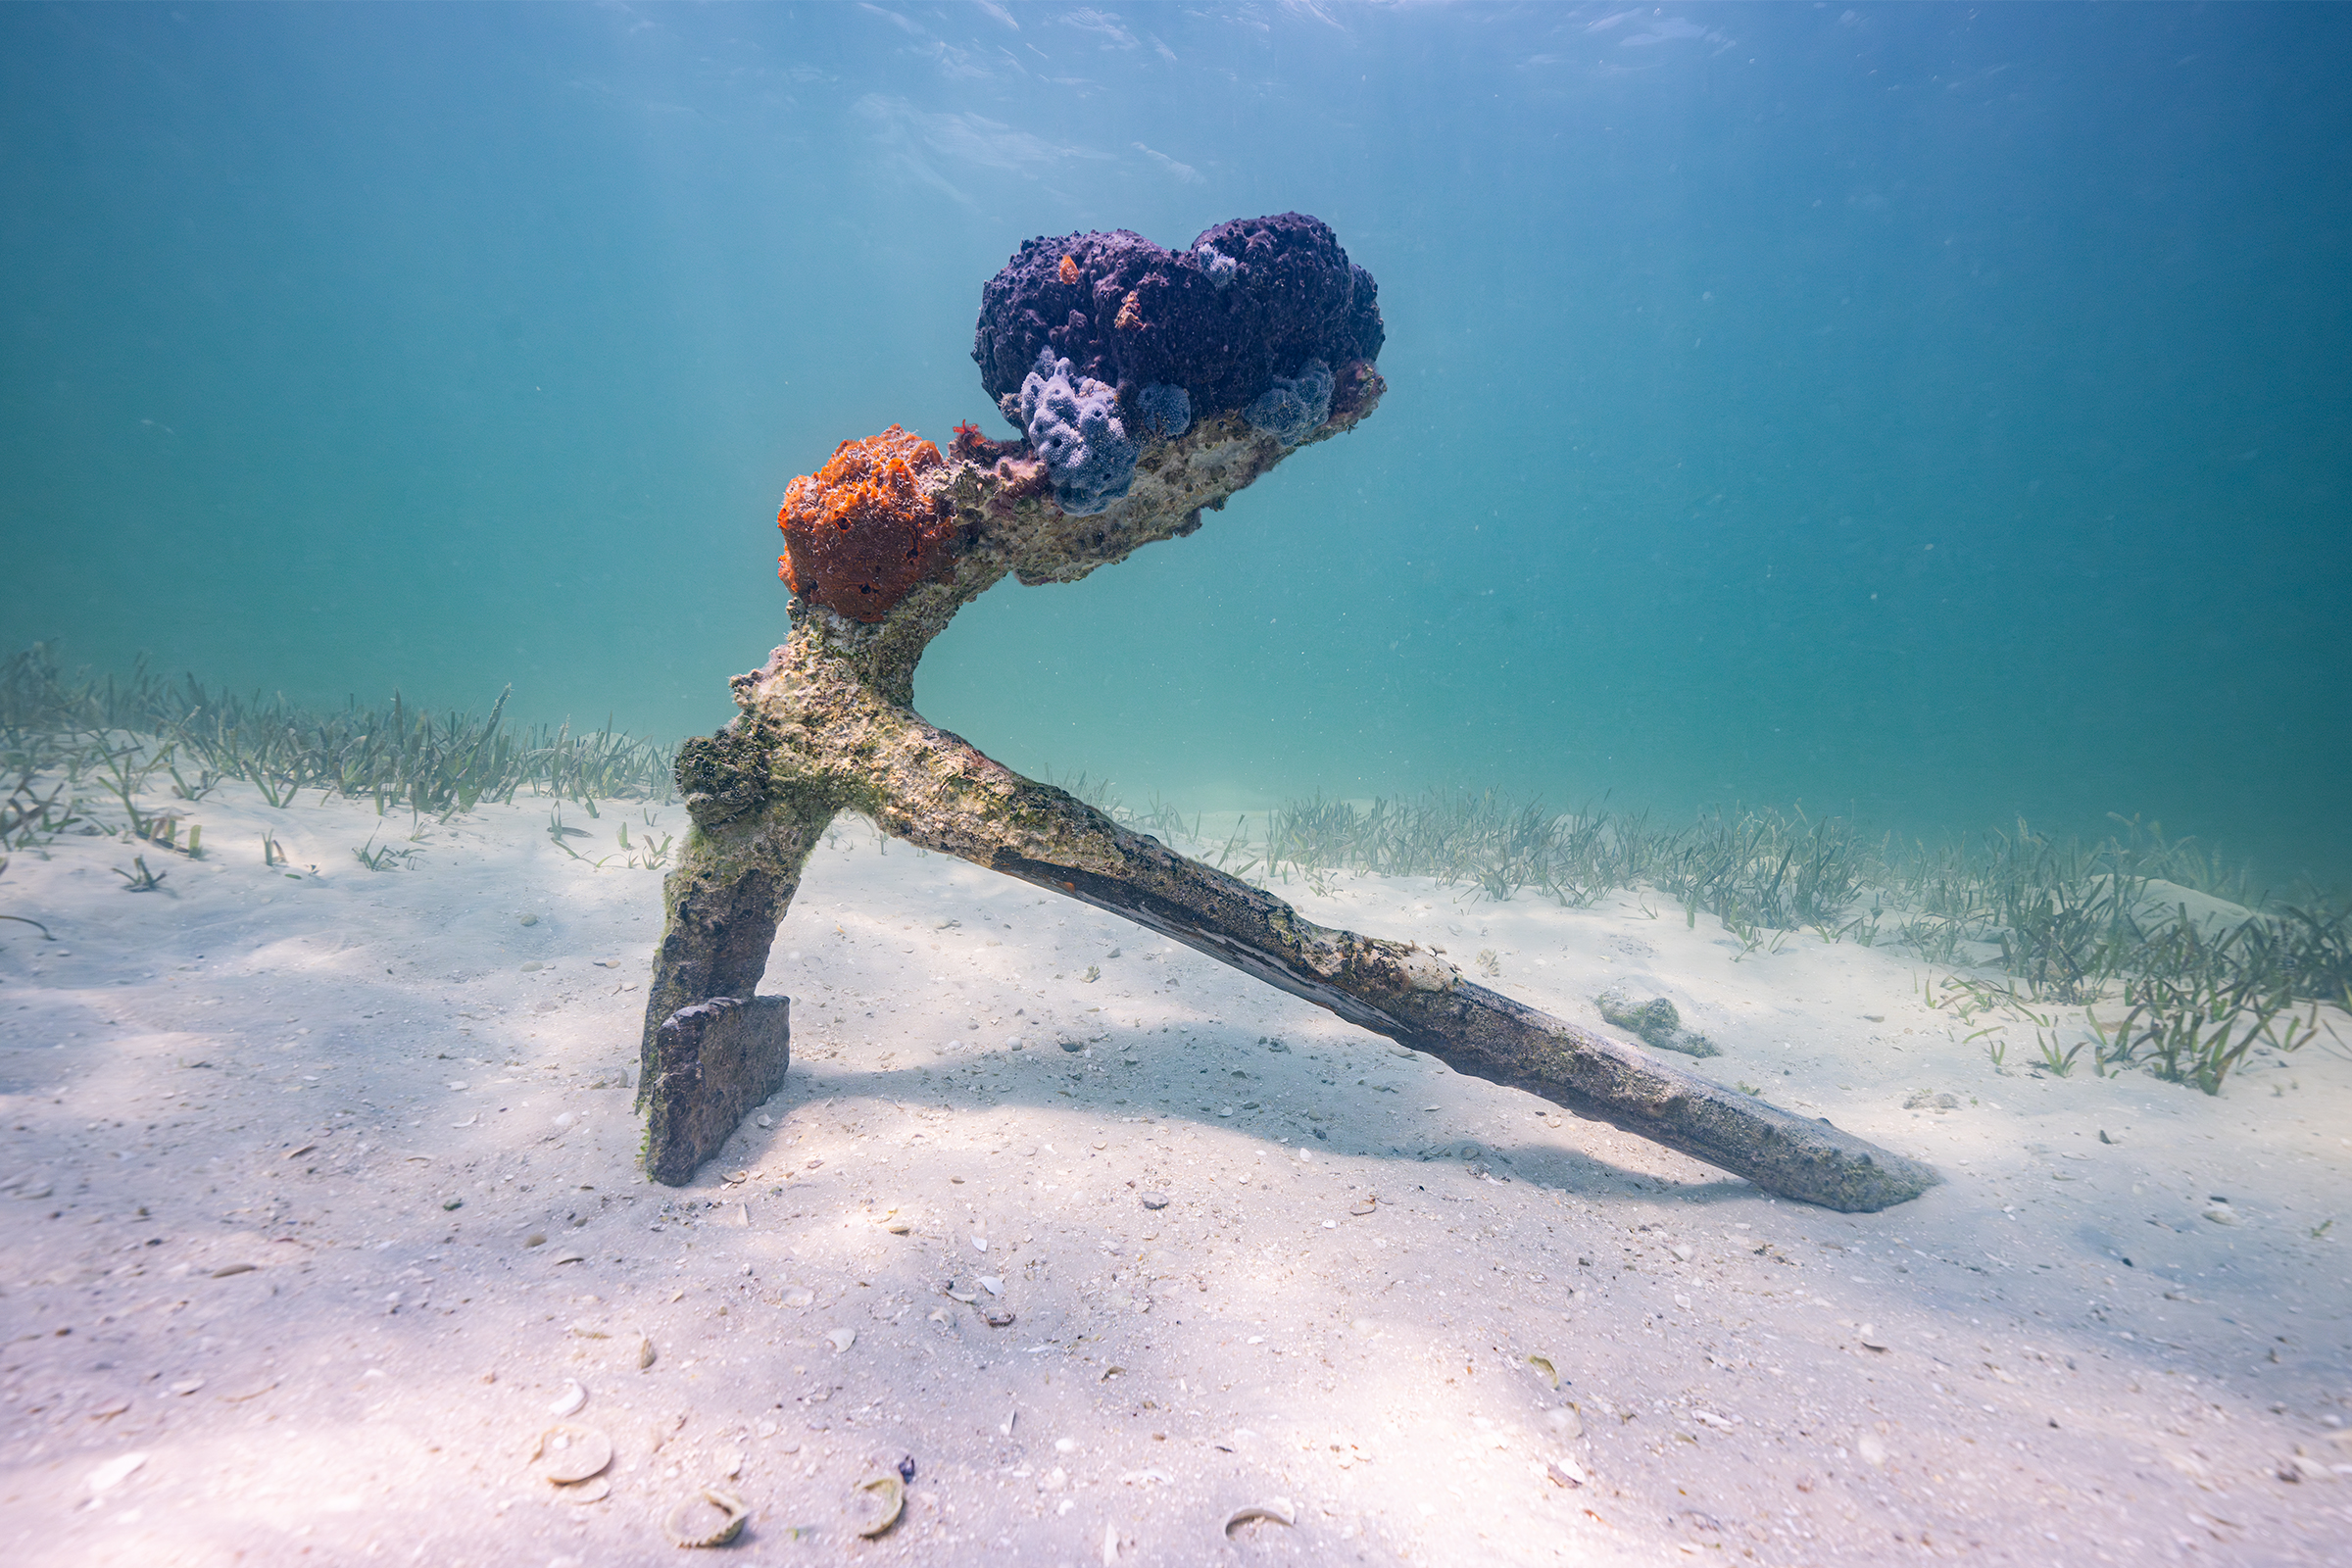 An old anchor encrusted with sponges rests on a sandy bay floor surrounded by seagrass.